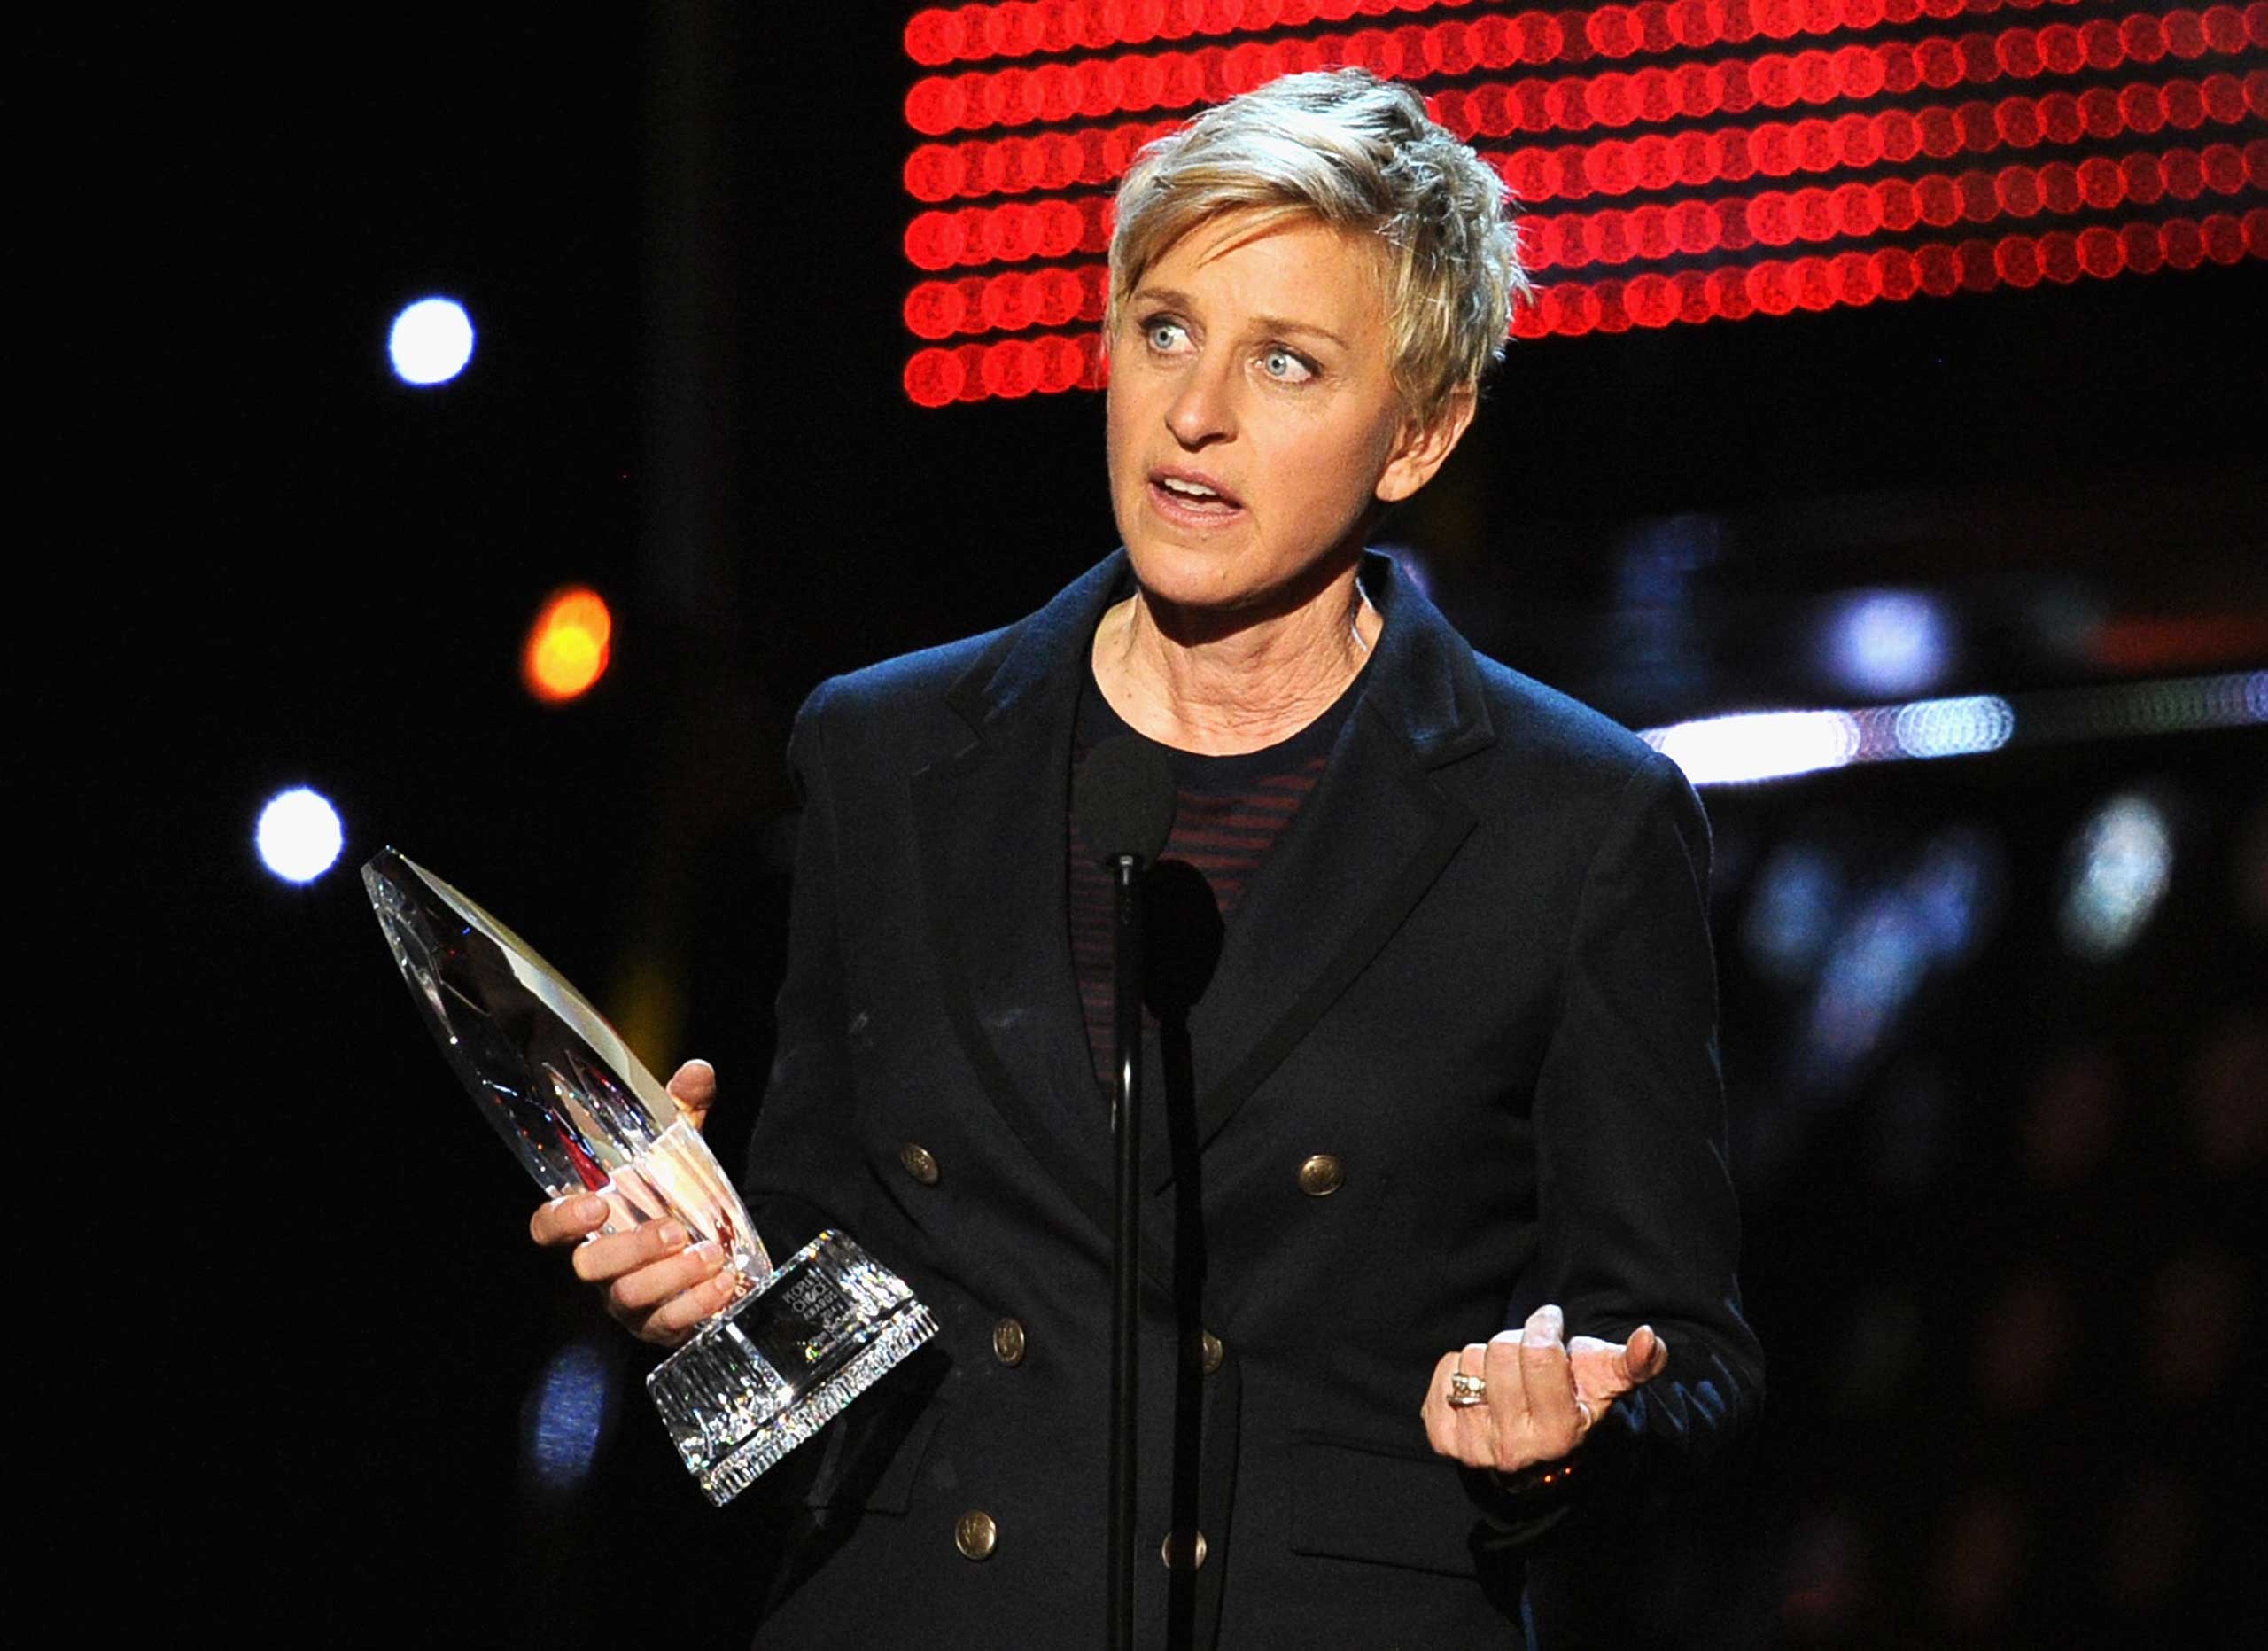 Ellen DeGeneres's lifestyle brand will include pet products and is set to launch late in 2014.